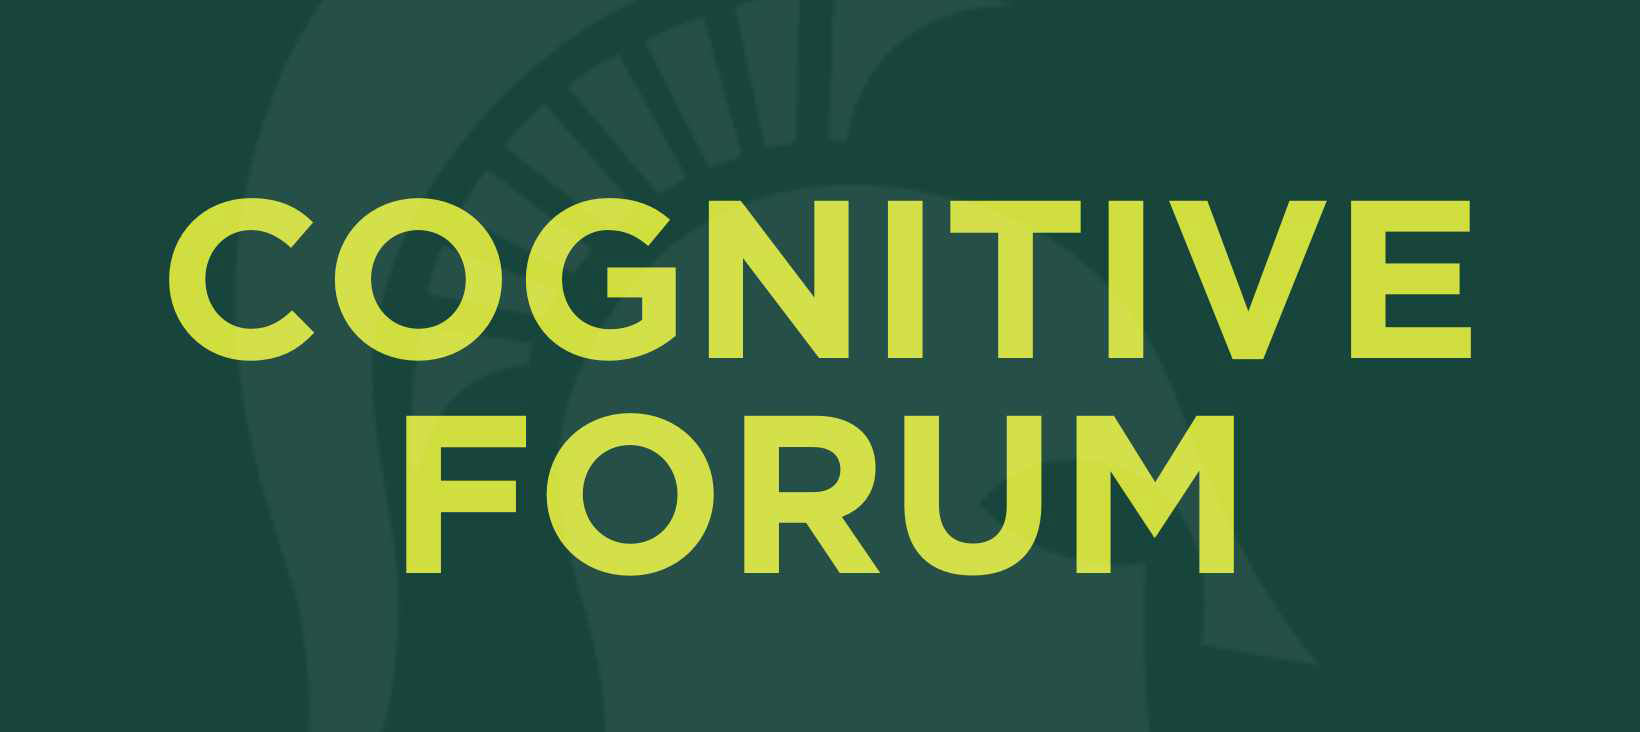 A green background with a faded Spartan head. Overtop it says Cognitive Forum in bright green.